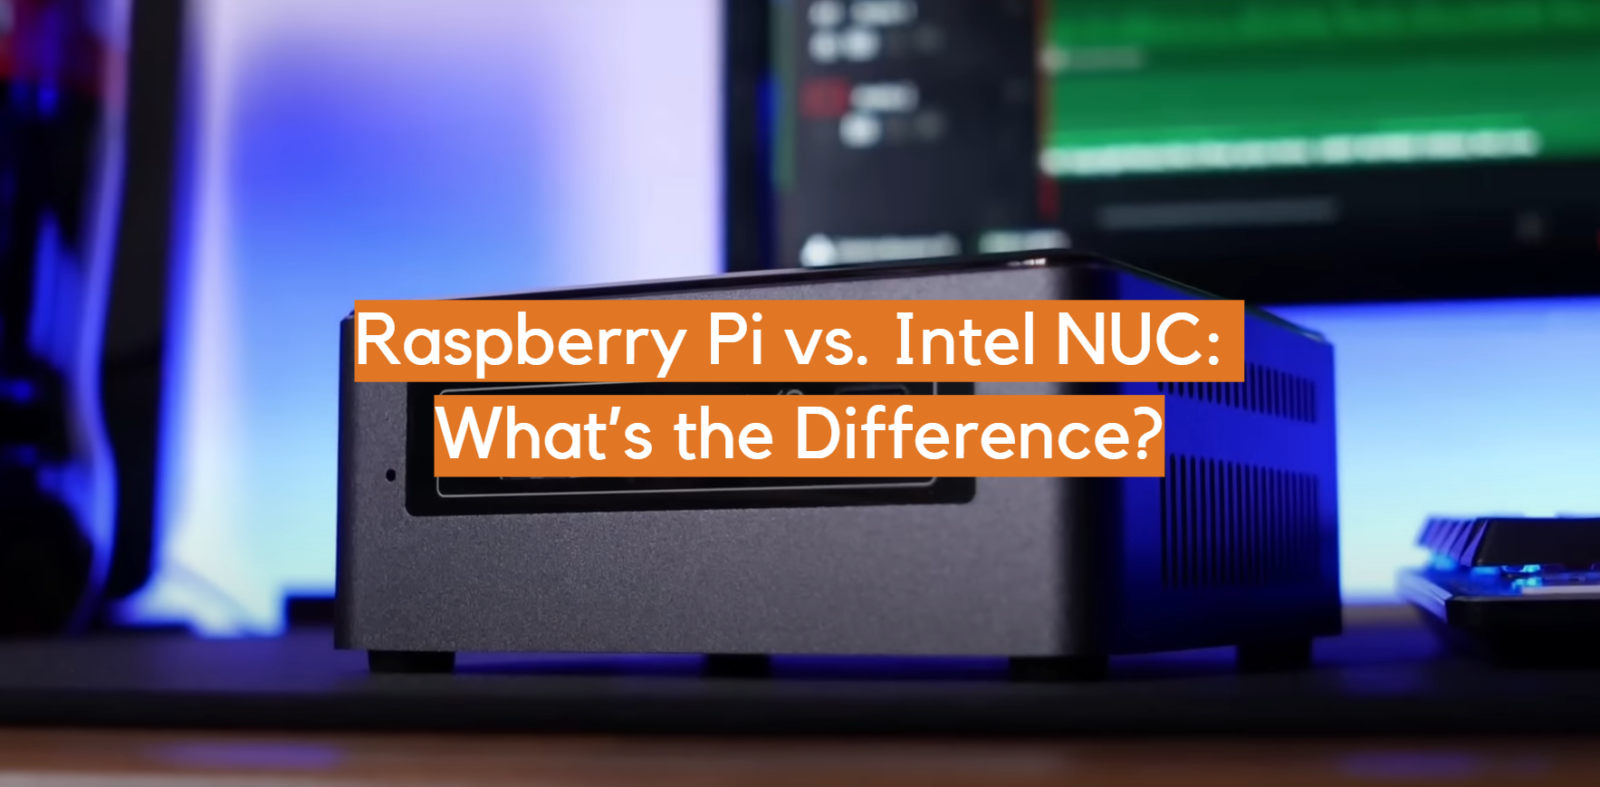 Raspberry Pi vs. Intel NUC: What’s the Difference?